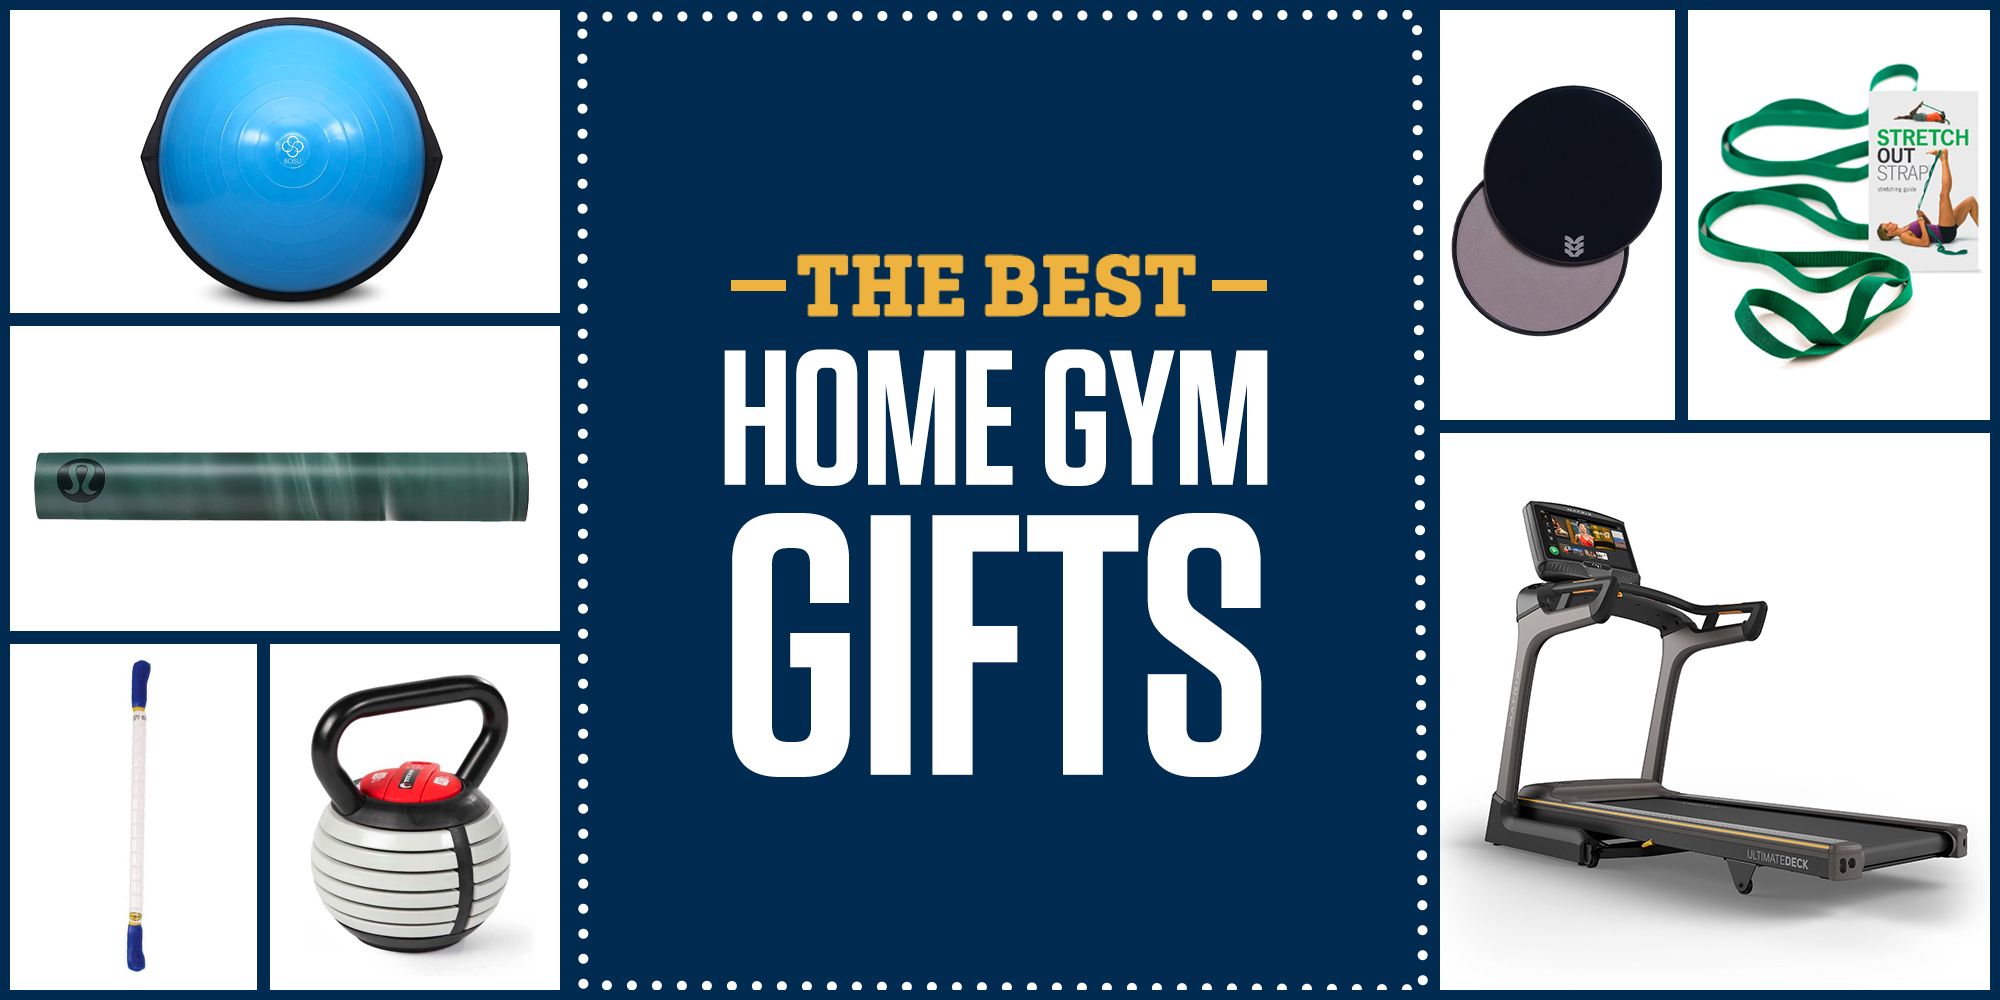 7 Home Gym Essentials to Gift for the Holidays